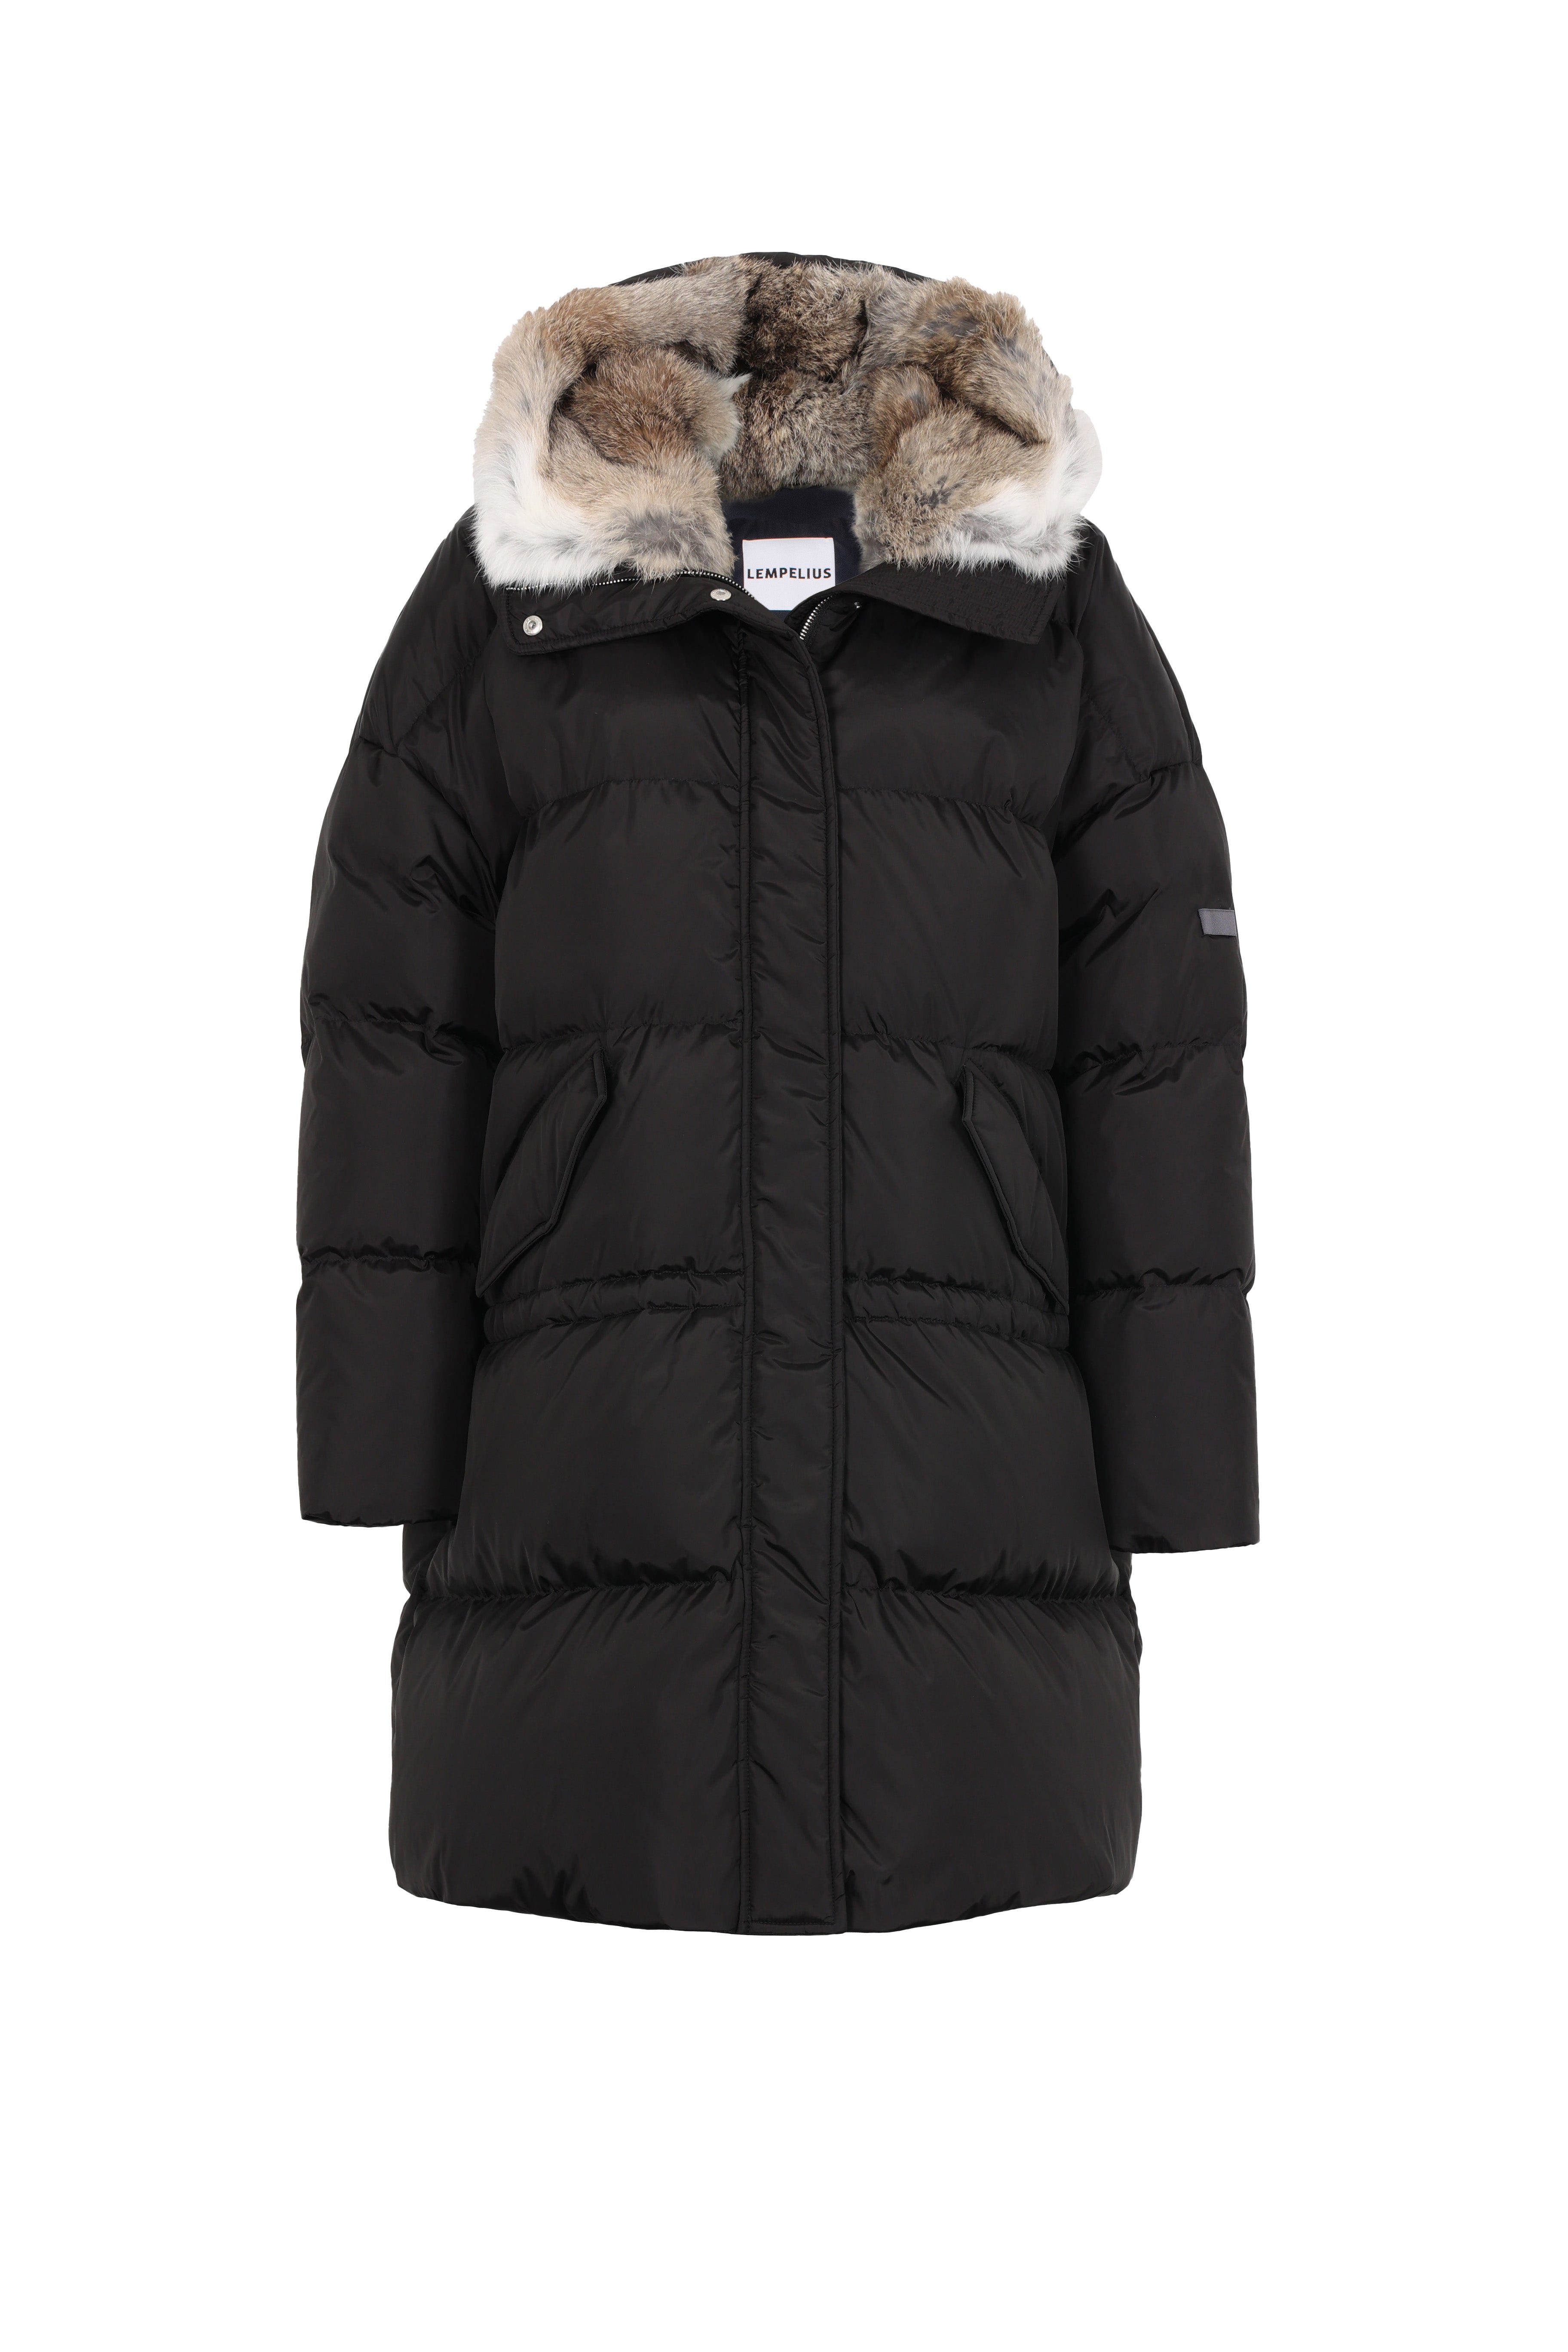 oversized Lempelius down parka in the color black